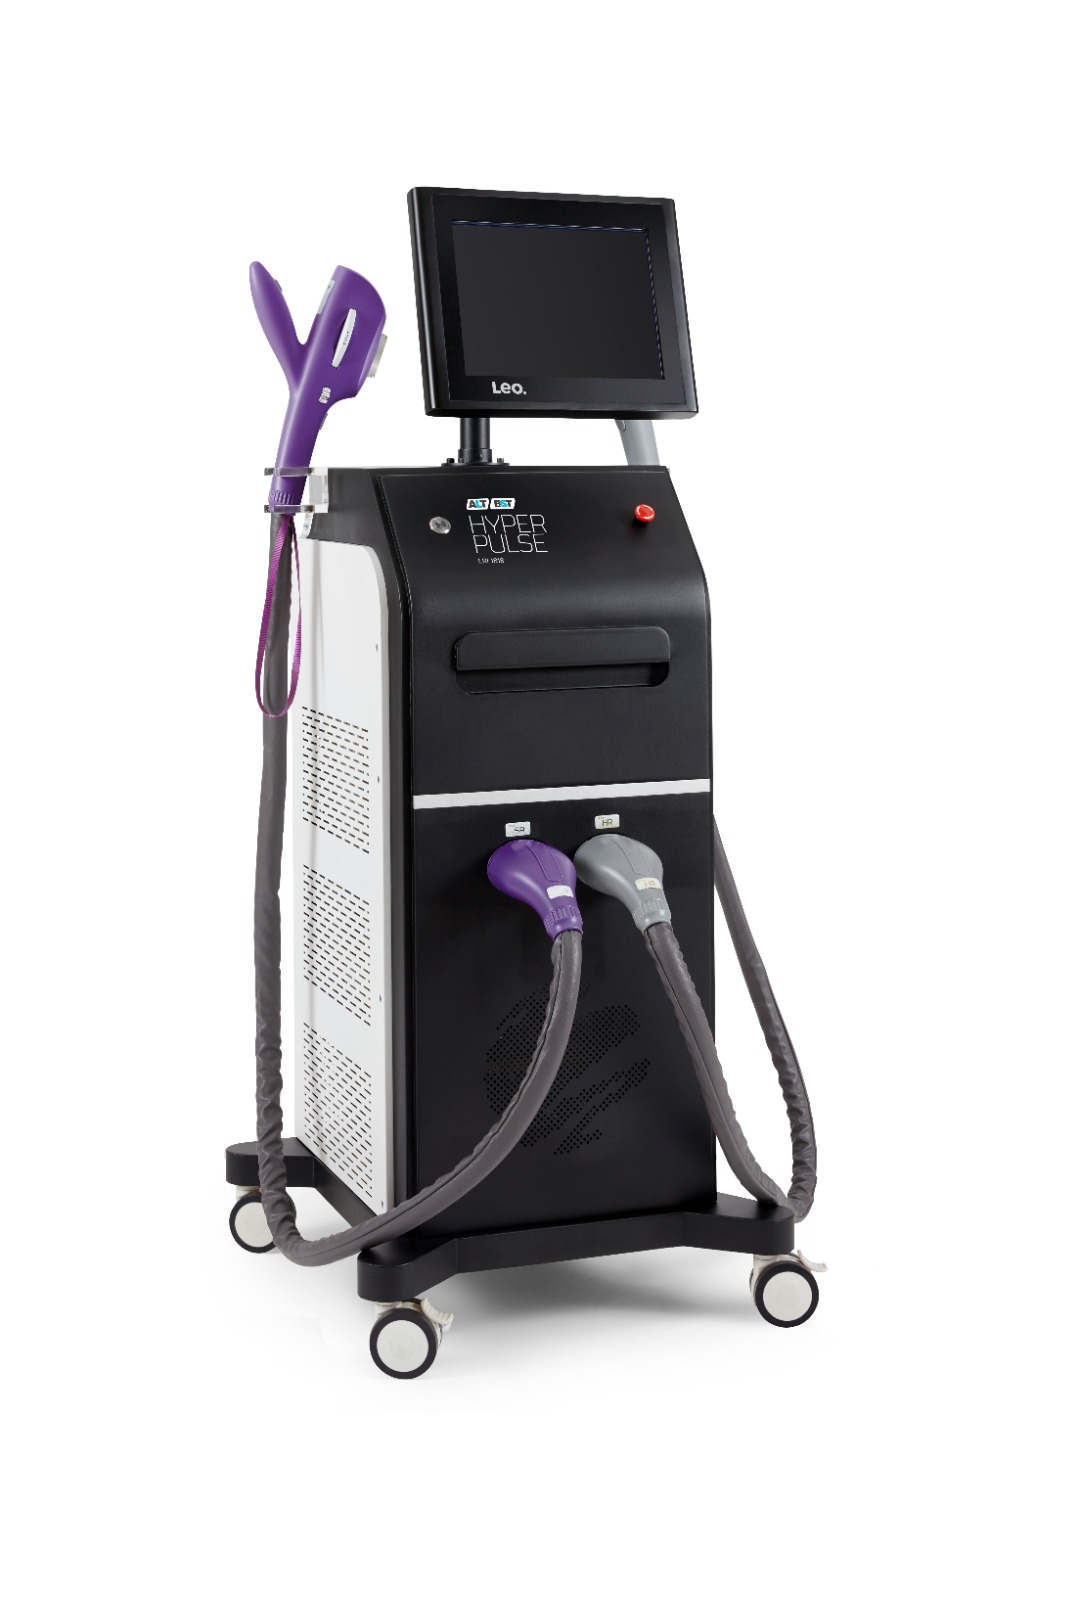 HYPER PULSE A.L.T B.S.T |    A Revolutionary device for Body Skin Tightening Treatments